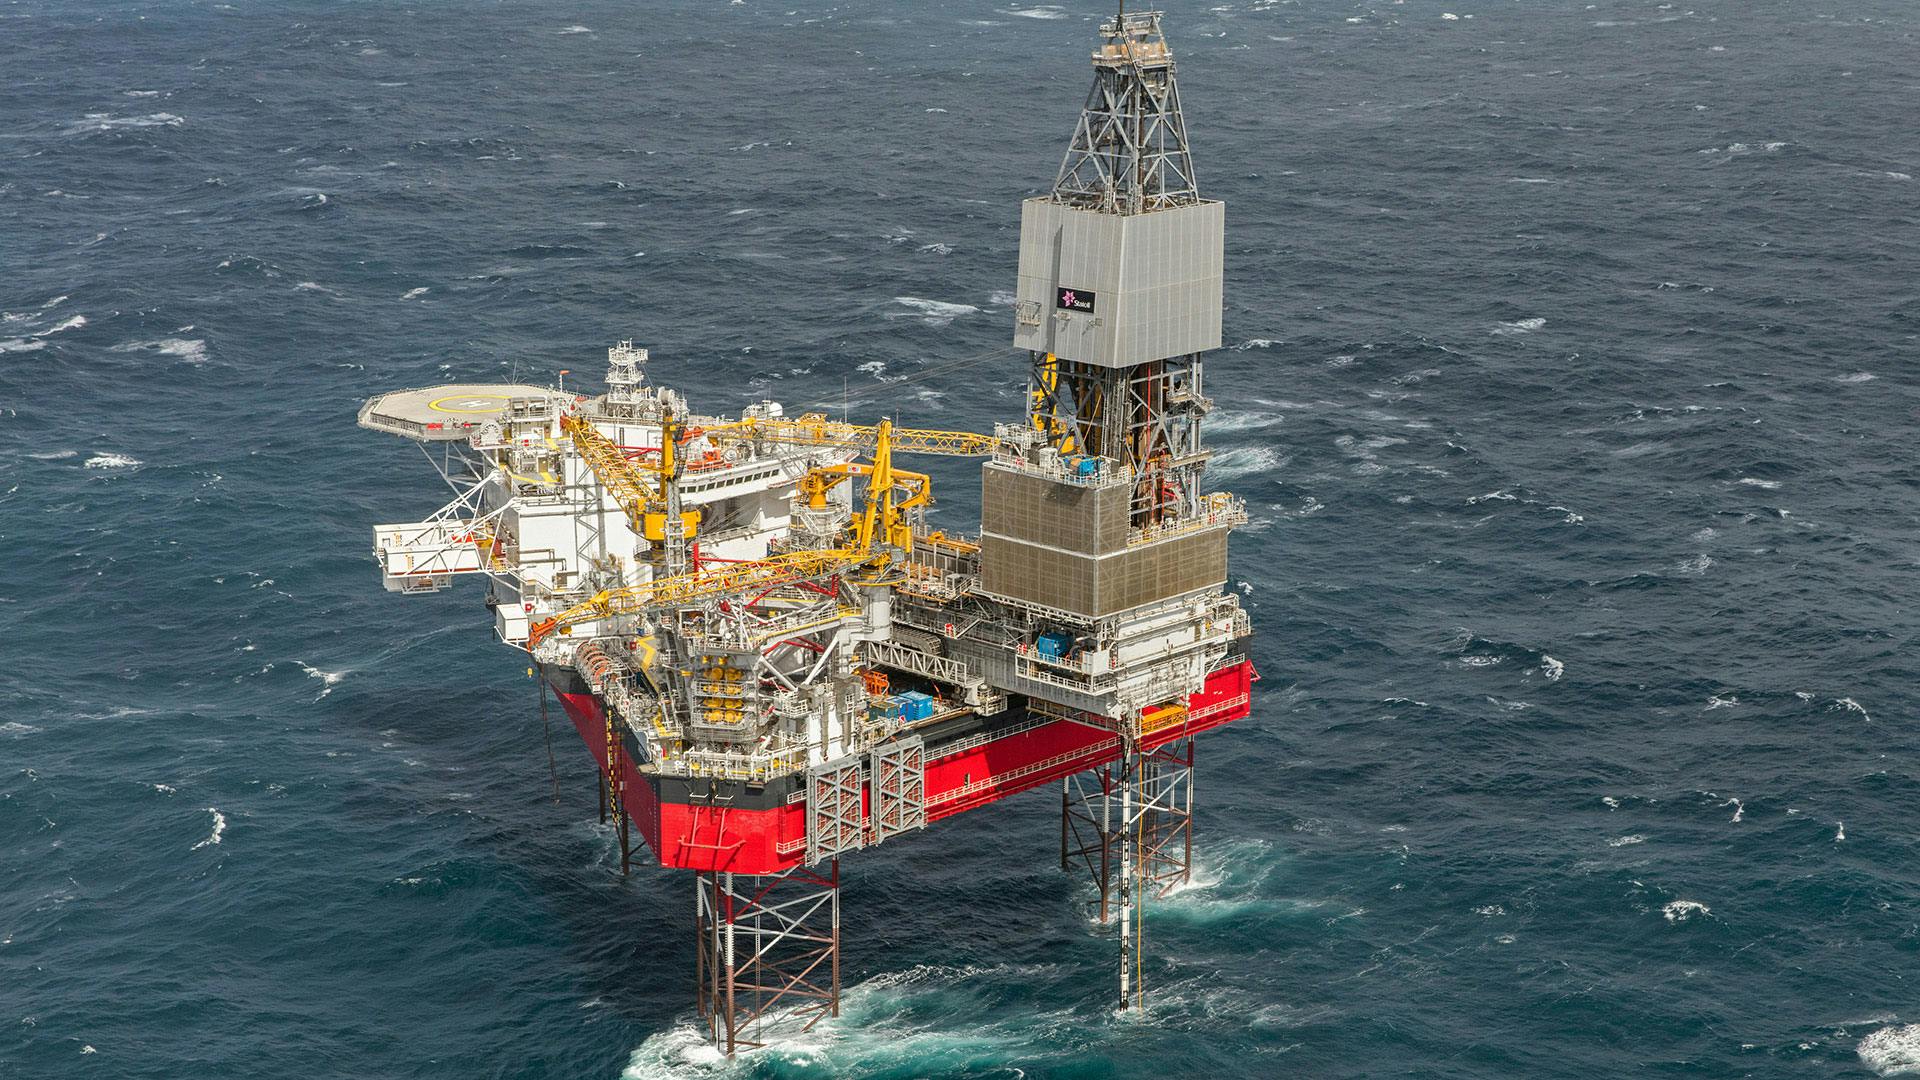 Jack-up rig out at sea